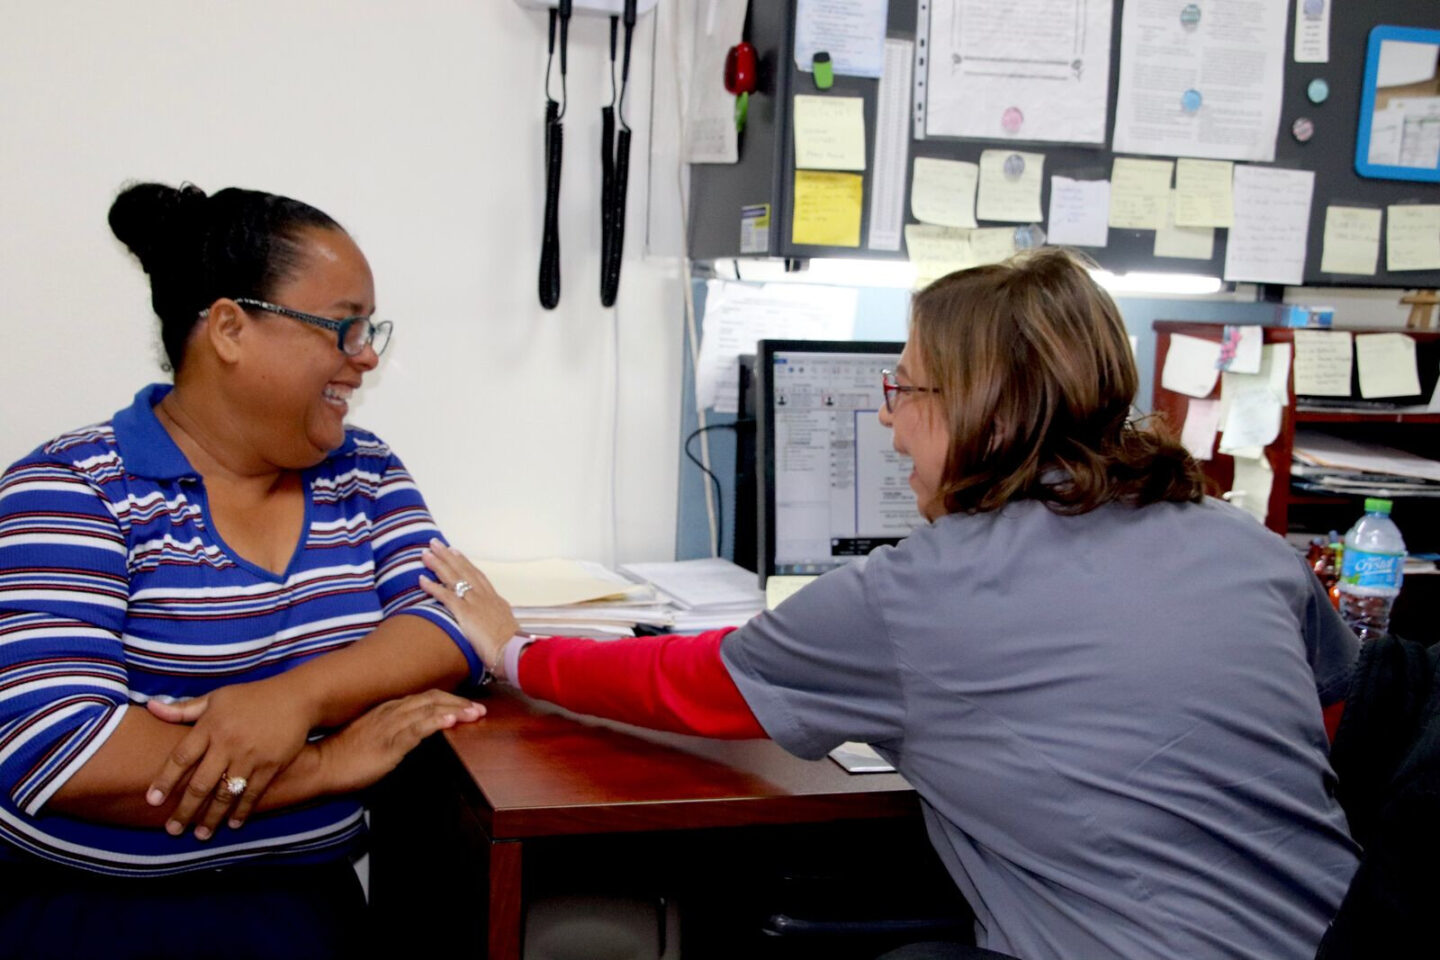 A nurse speaks with a patient at a medical clinic in Puerto Rico